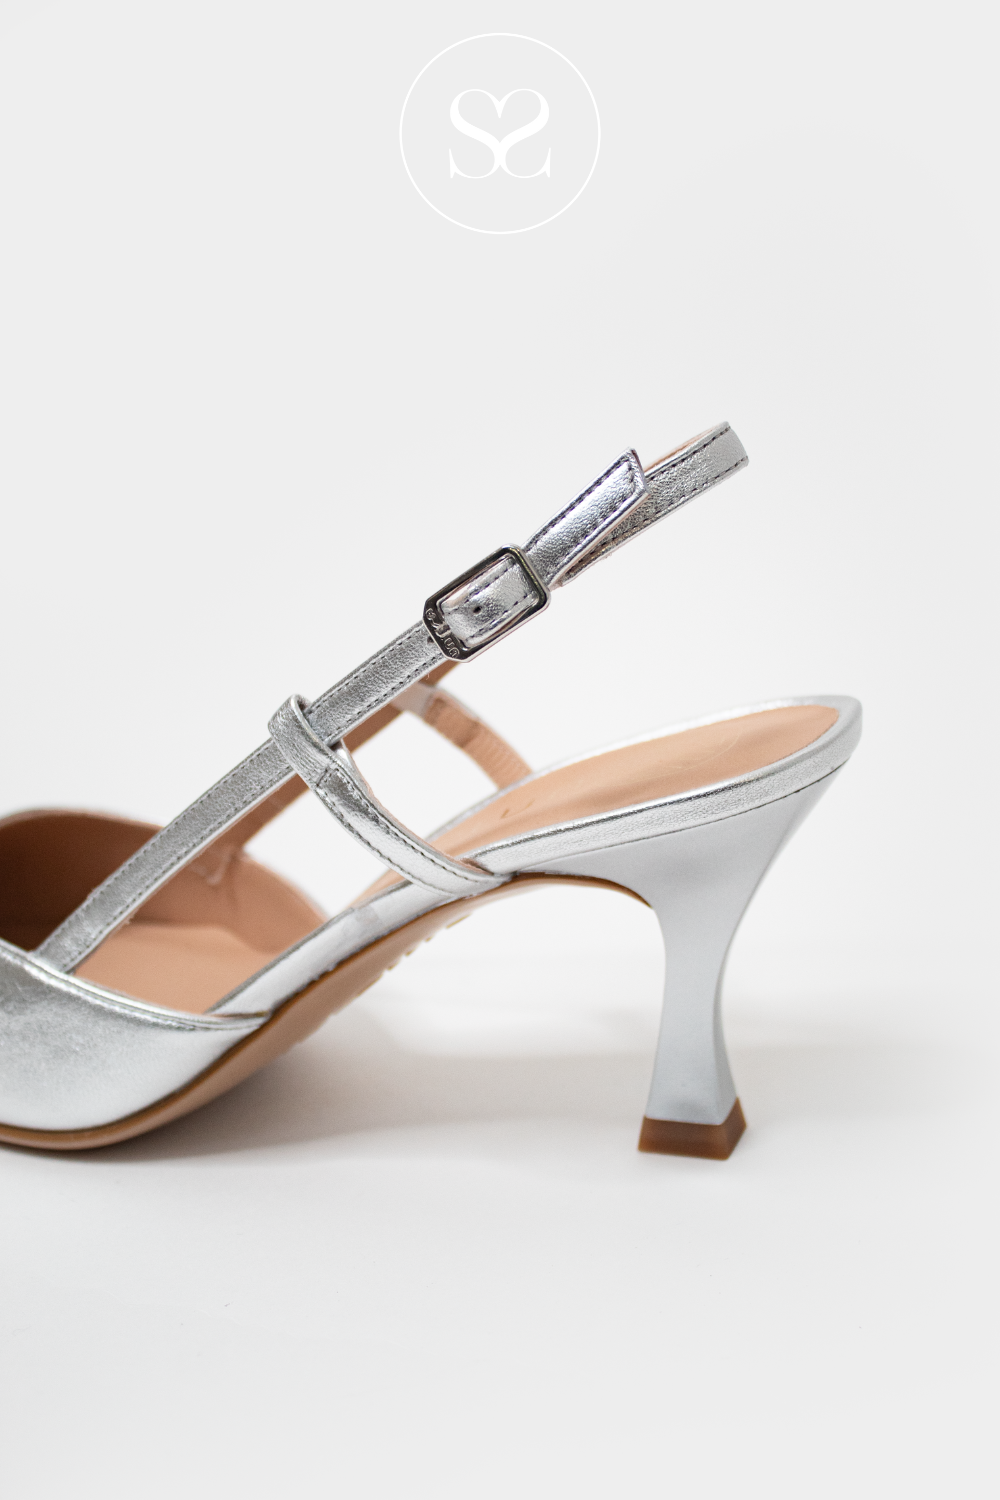 UNISA KLEEF SILVER METALLIC LEATHER SLINGBACK POINTED TOE LOW HEEL WITH ADJUSTABLE ANKLE STRAP